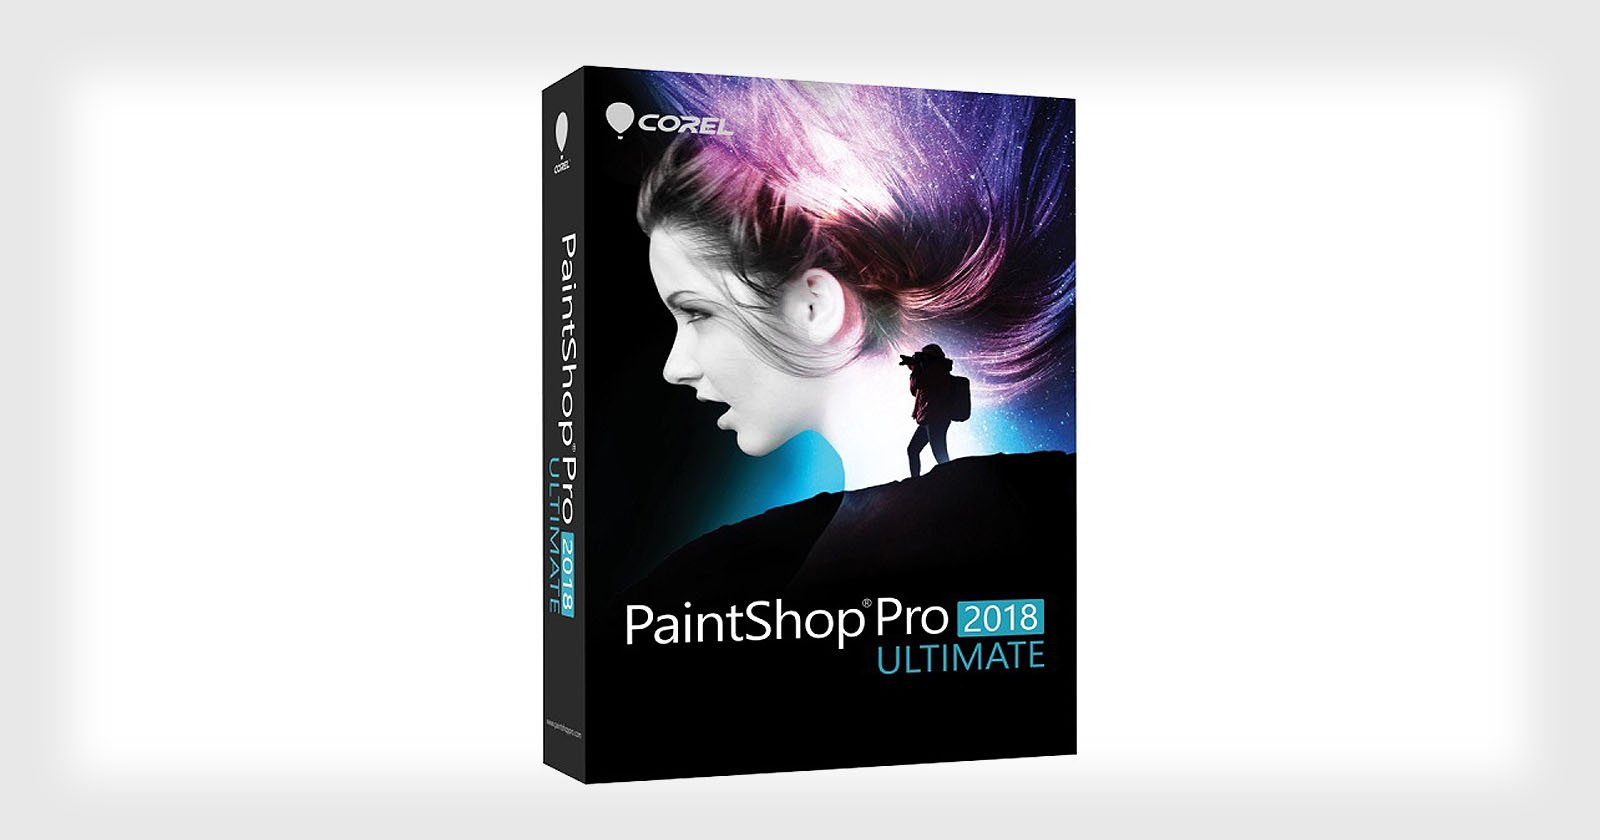 Corel Unveils PaintShop Pro 2018 with More Speed, Sleekness, and Features